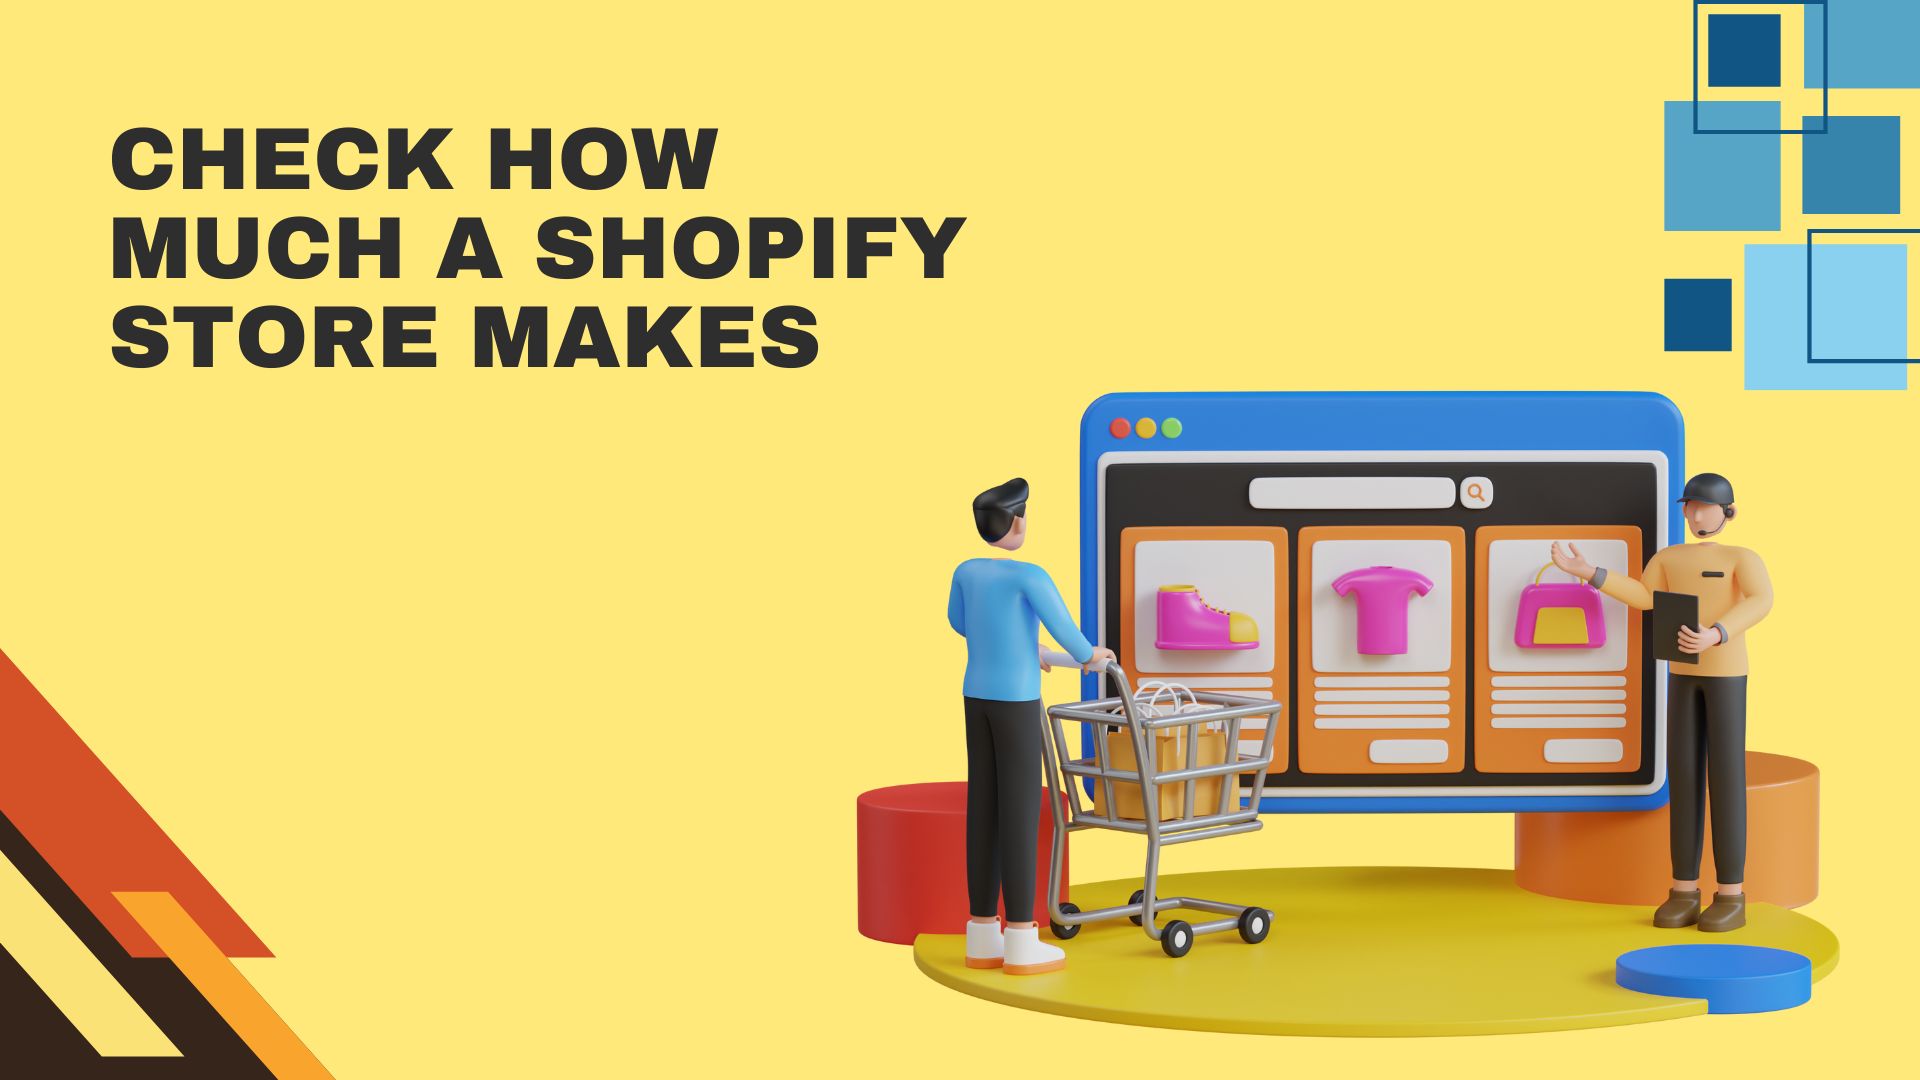 Check How Much a Shopify Store Makes